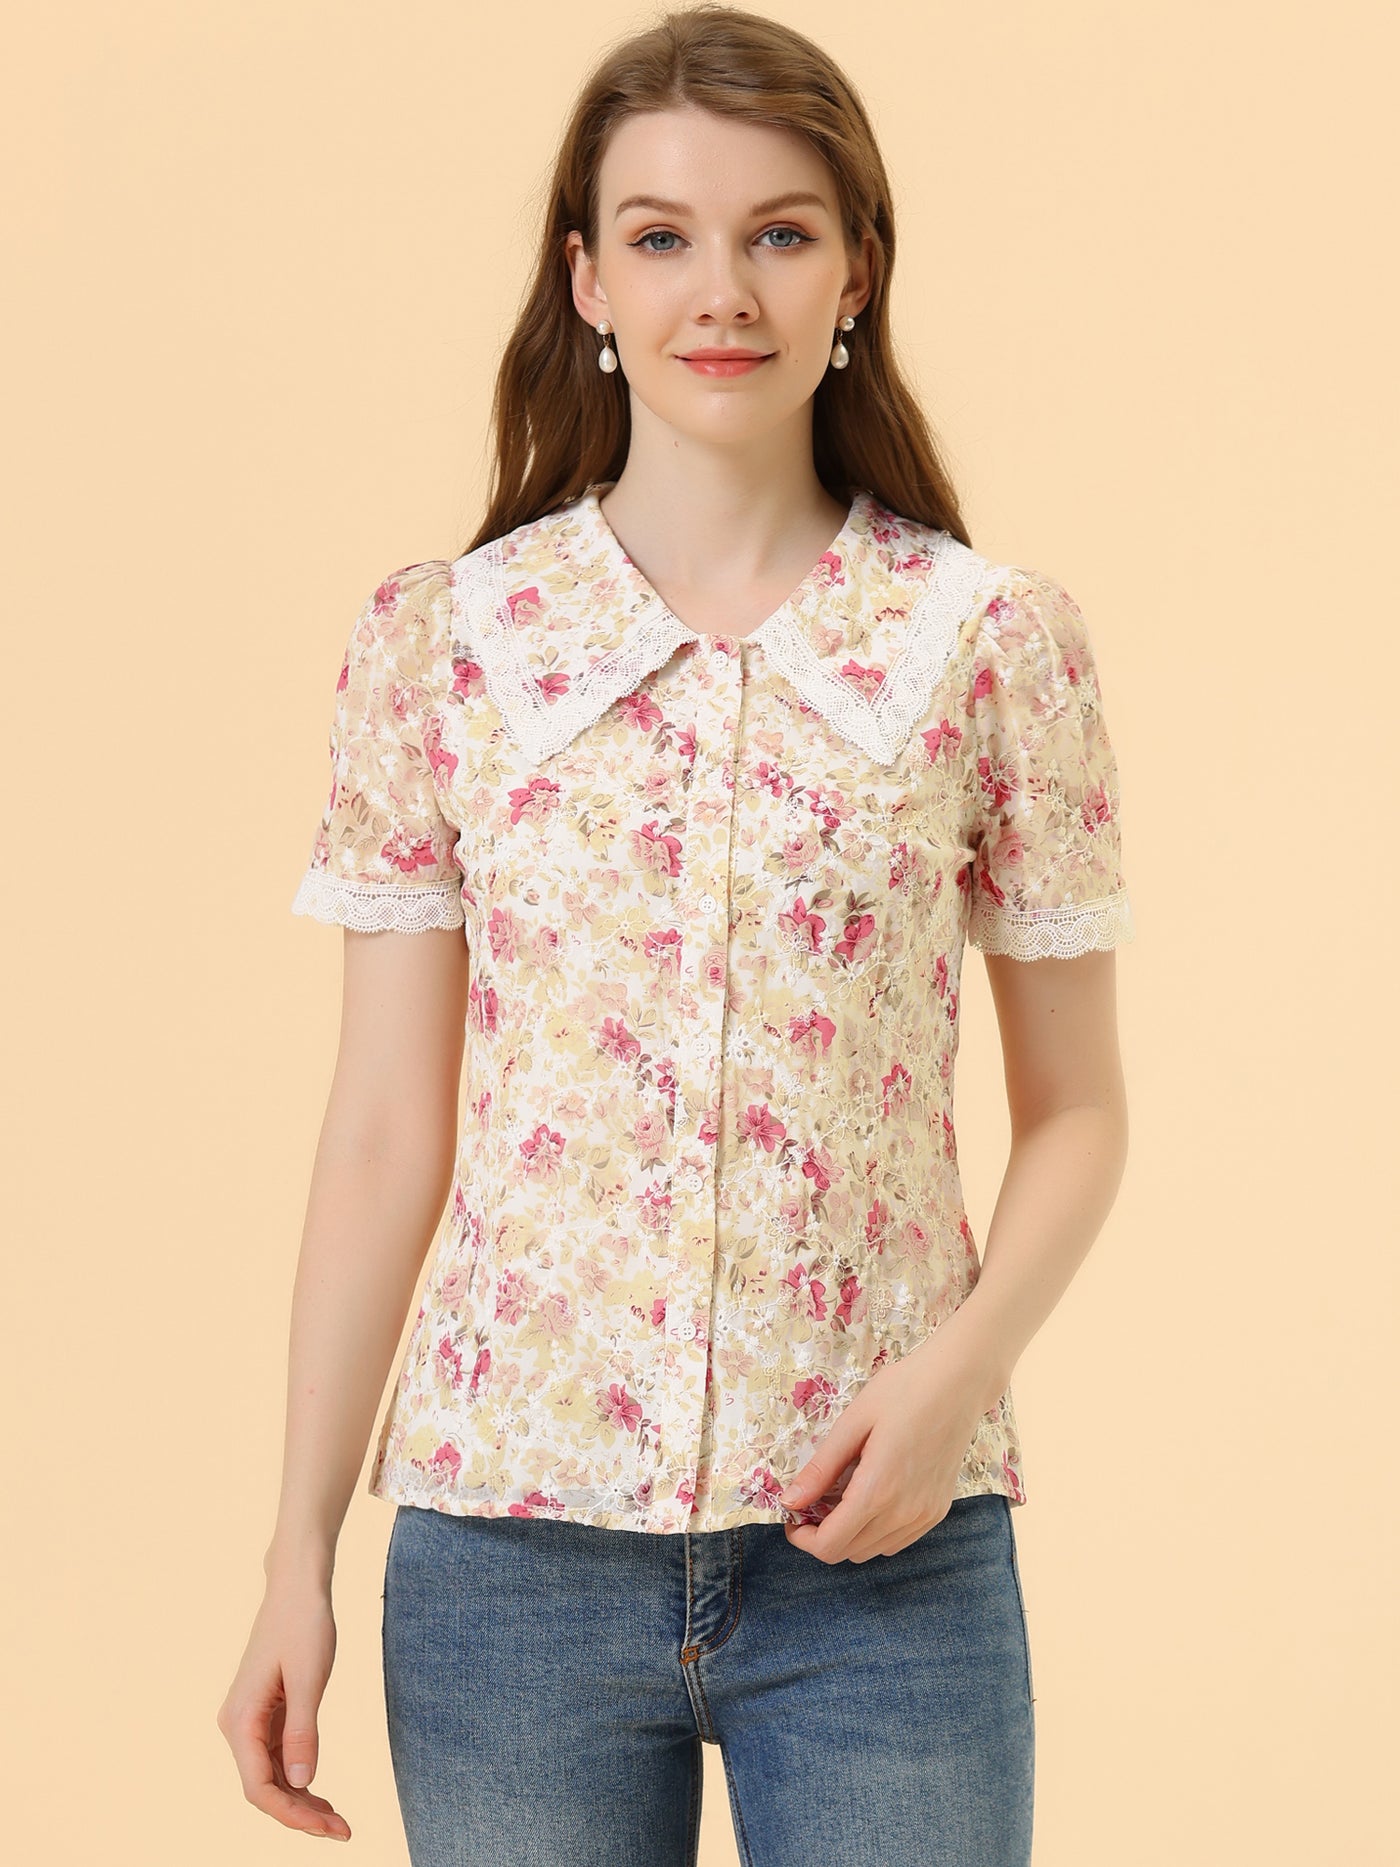 Allegra K Women's Peter Pan Collar Shirt Lace Embroidered 1940s Vintage Peasant Floral Blouse